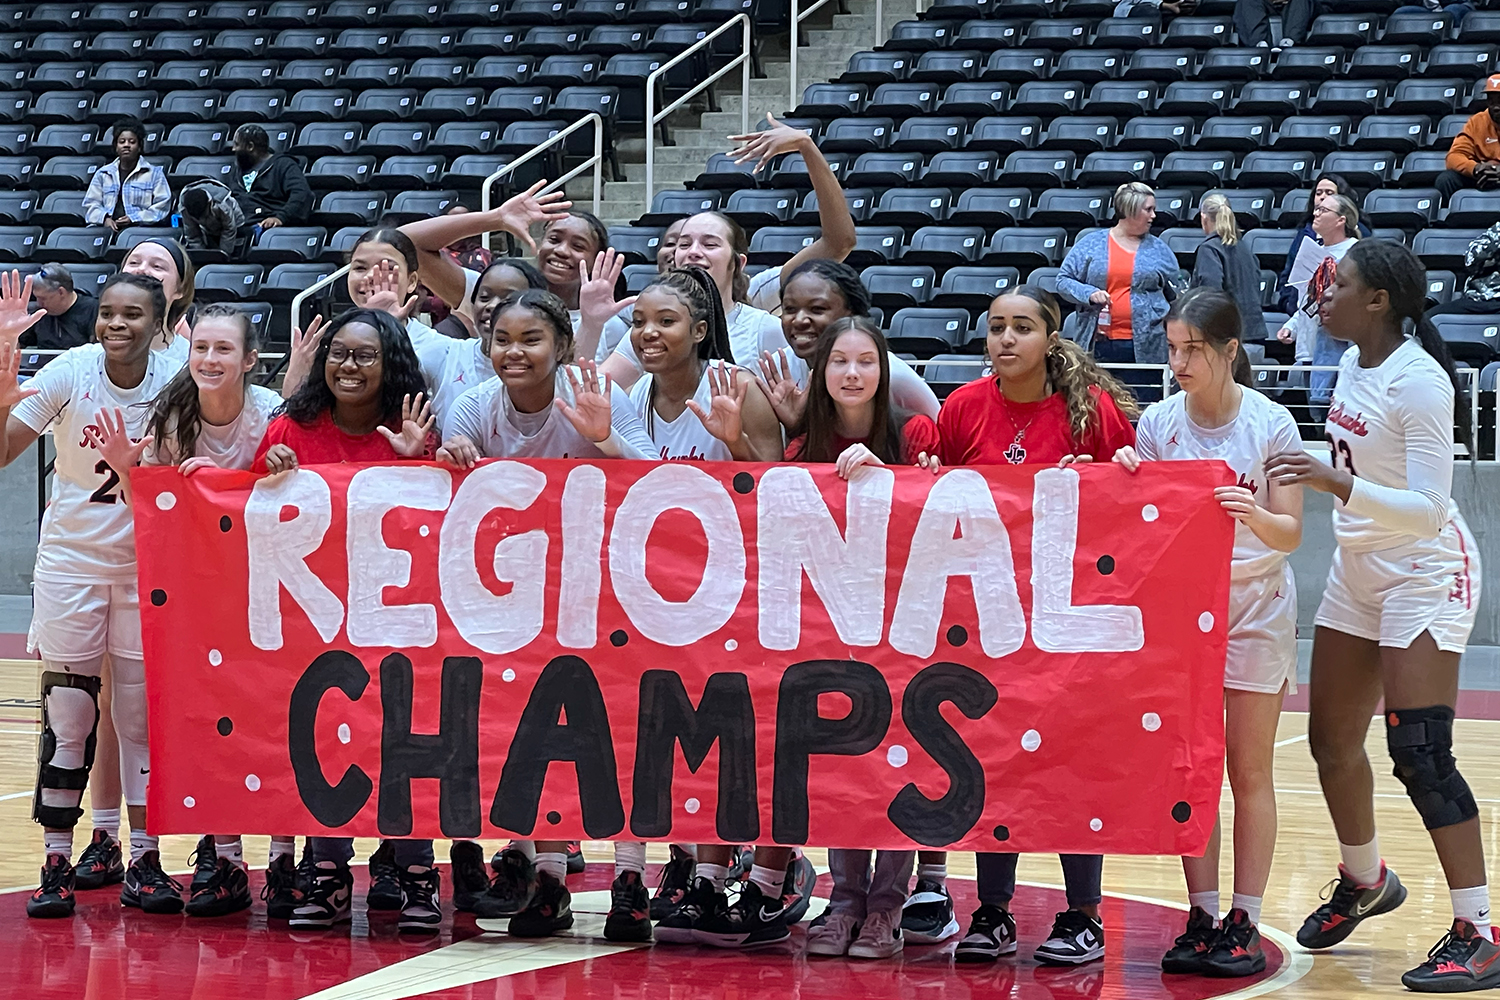 Redhawks+return+to+state+tournament+for+5th+time